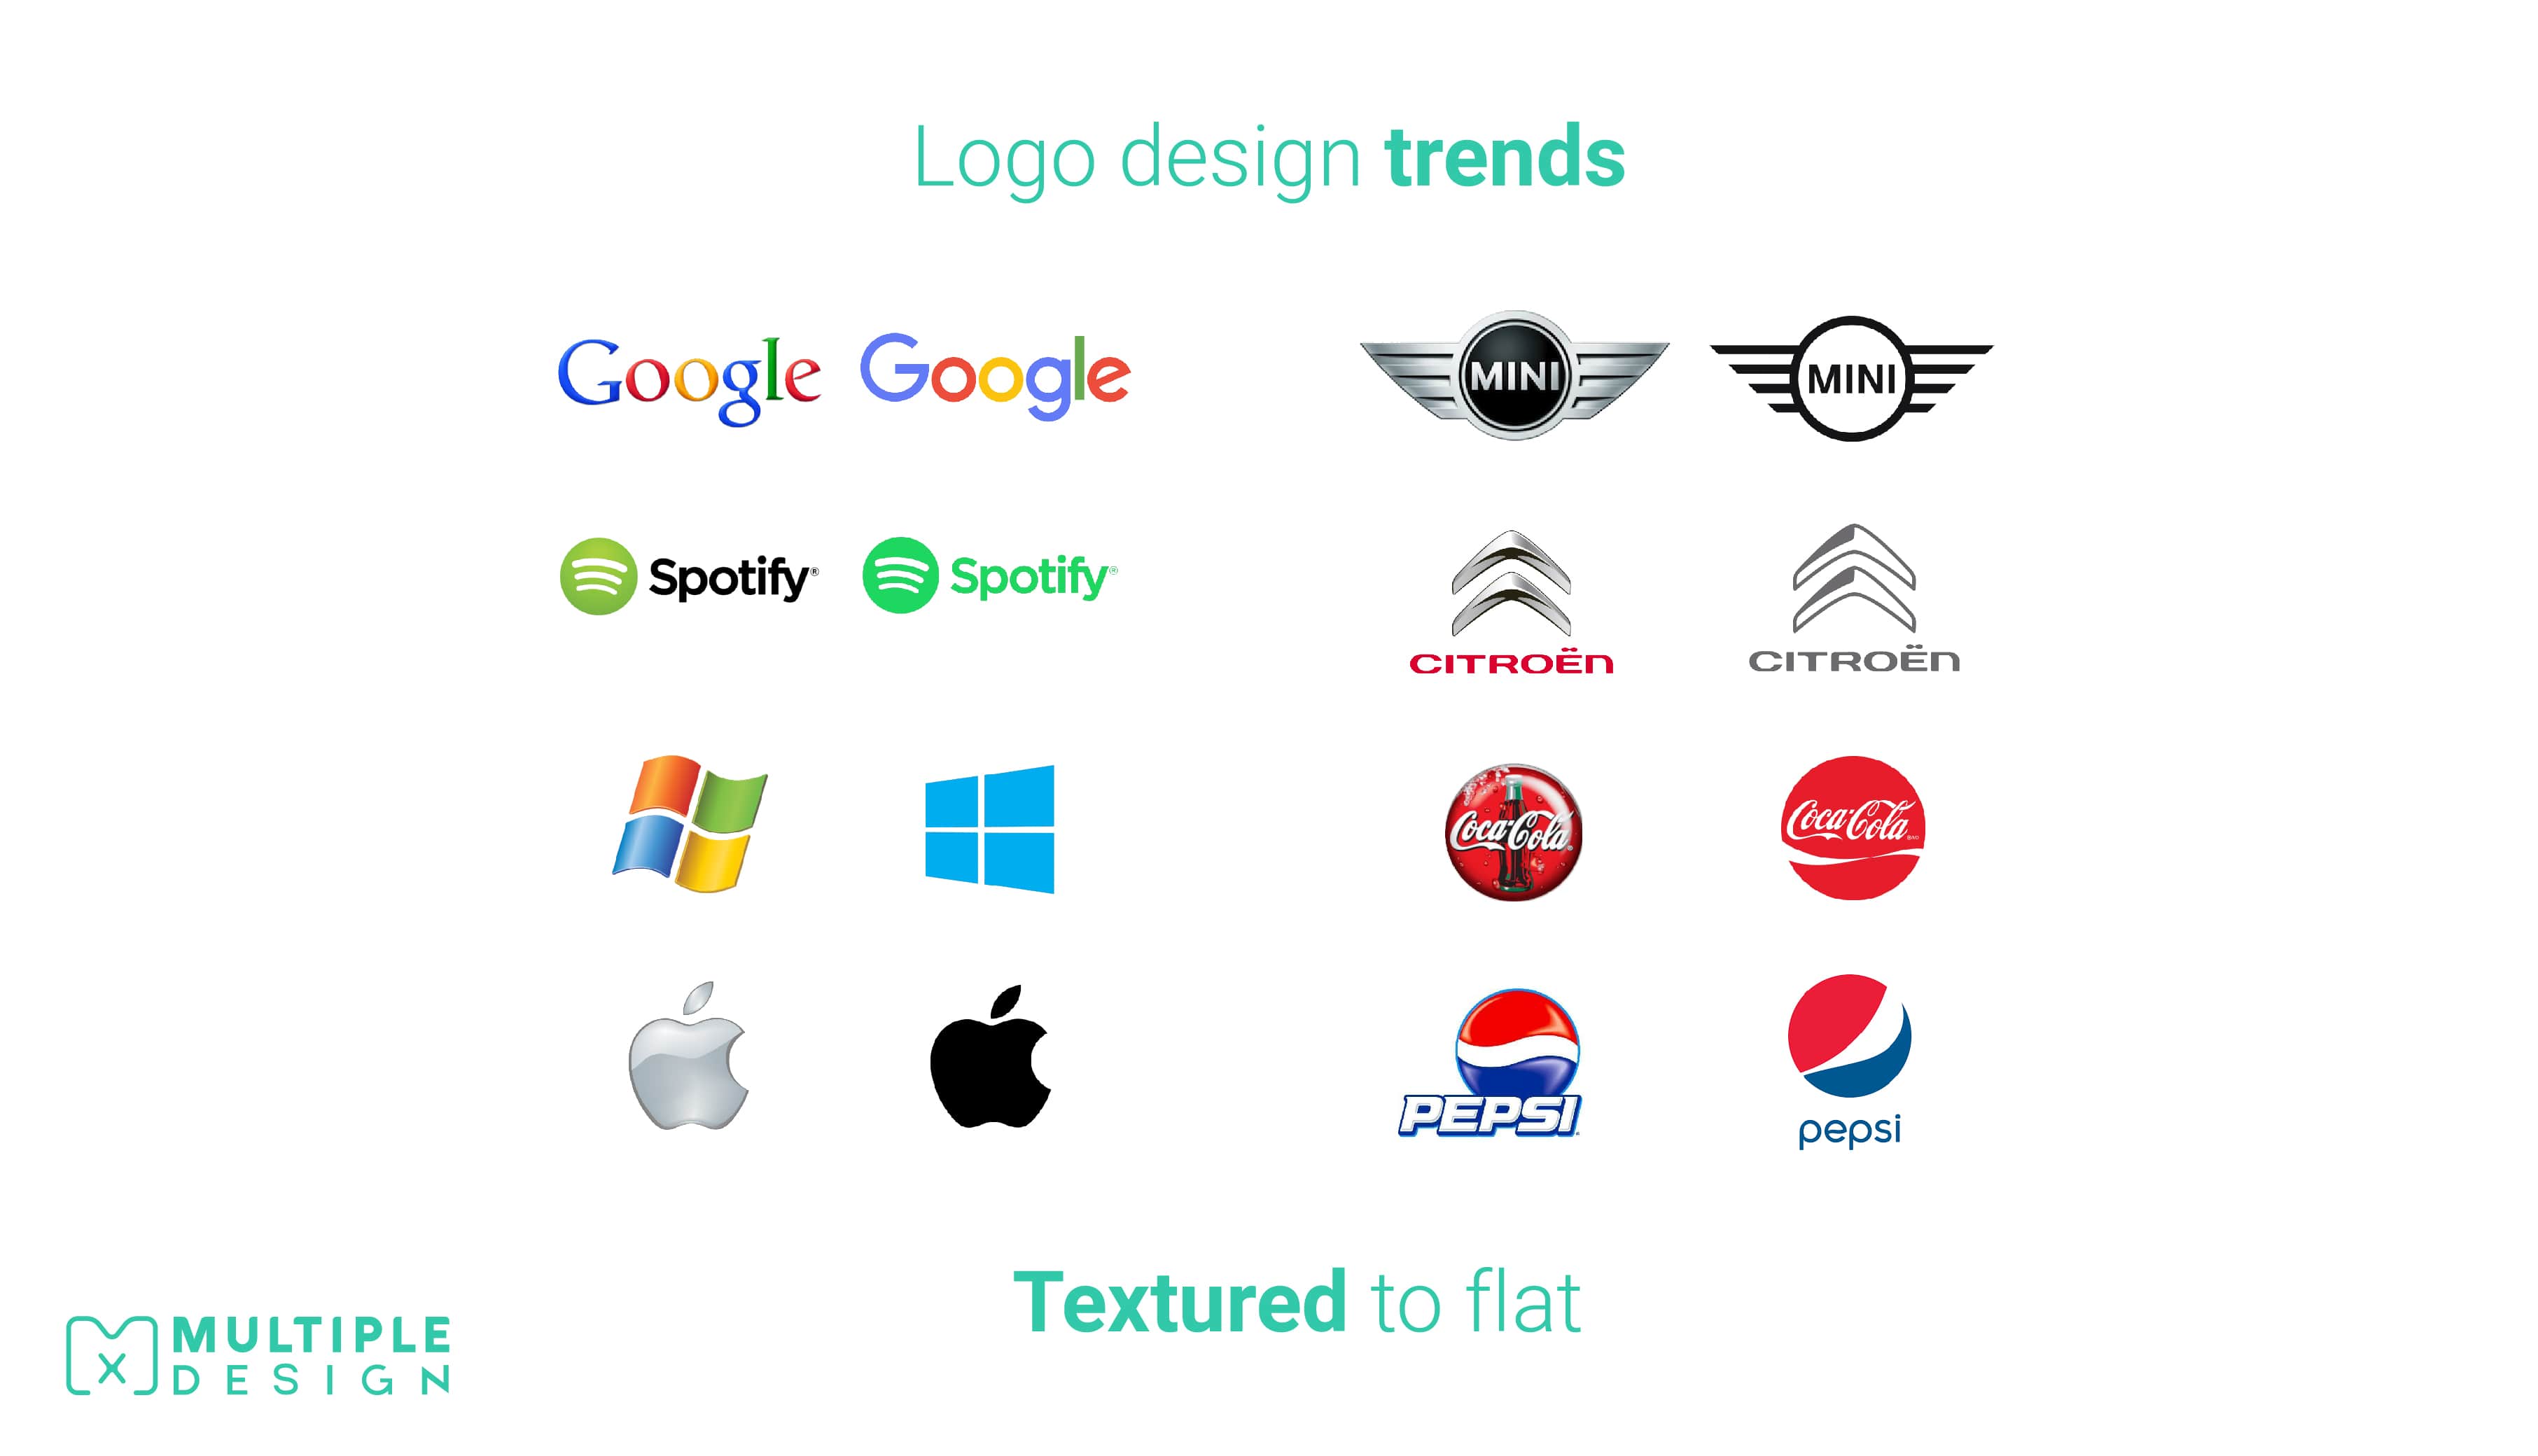 Logo design trends, from textured to flat, Google, Windows, Apple, Coke and Pepsi